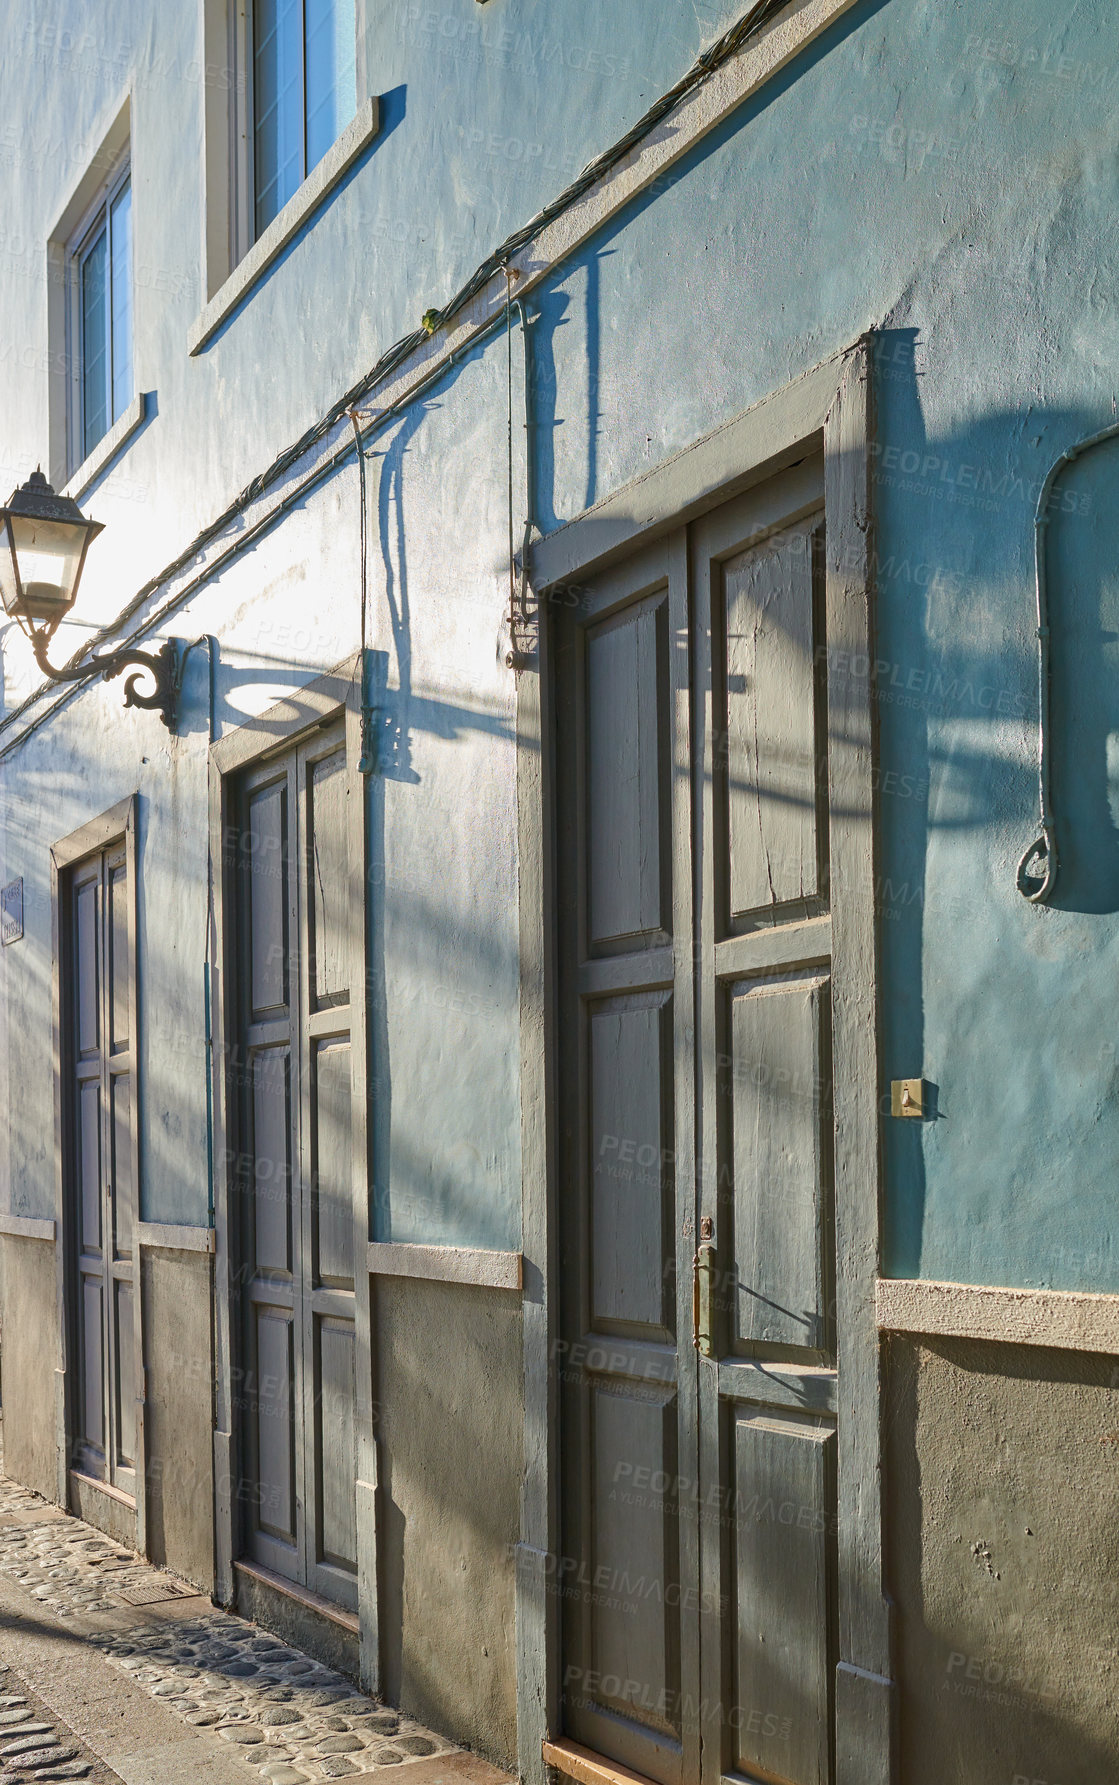 Buy stock photo Classic architecture of vibrant buildings with blue doors in a city. Closeup view of ancient and traditional homes or houses in a small vintage town or village with bright colors and a unique design